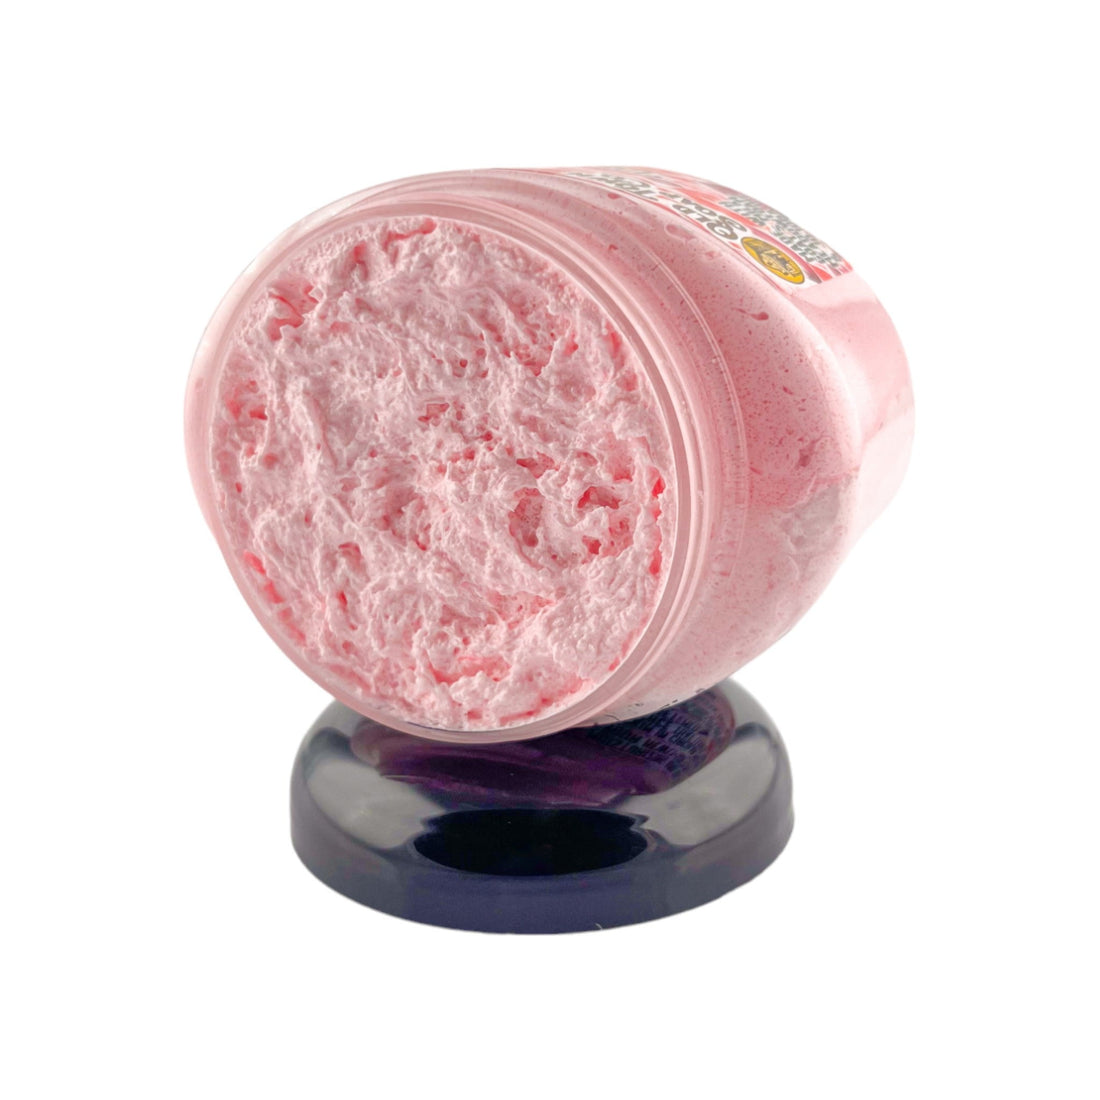 Passionate Kisses -Whipped Sugar Scrub Soap - Old Town Soap Co.